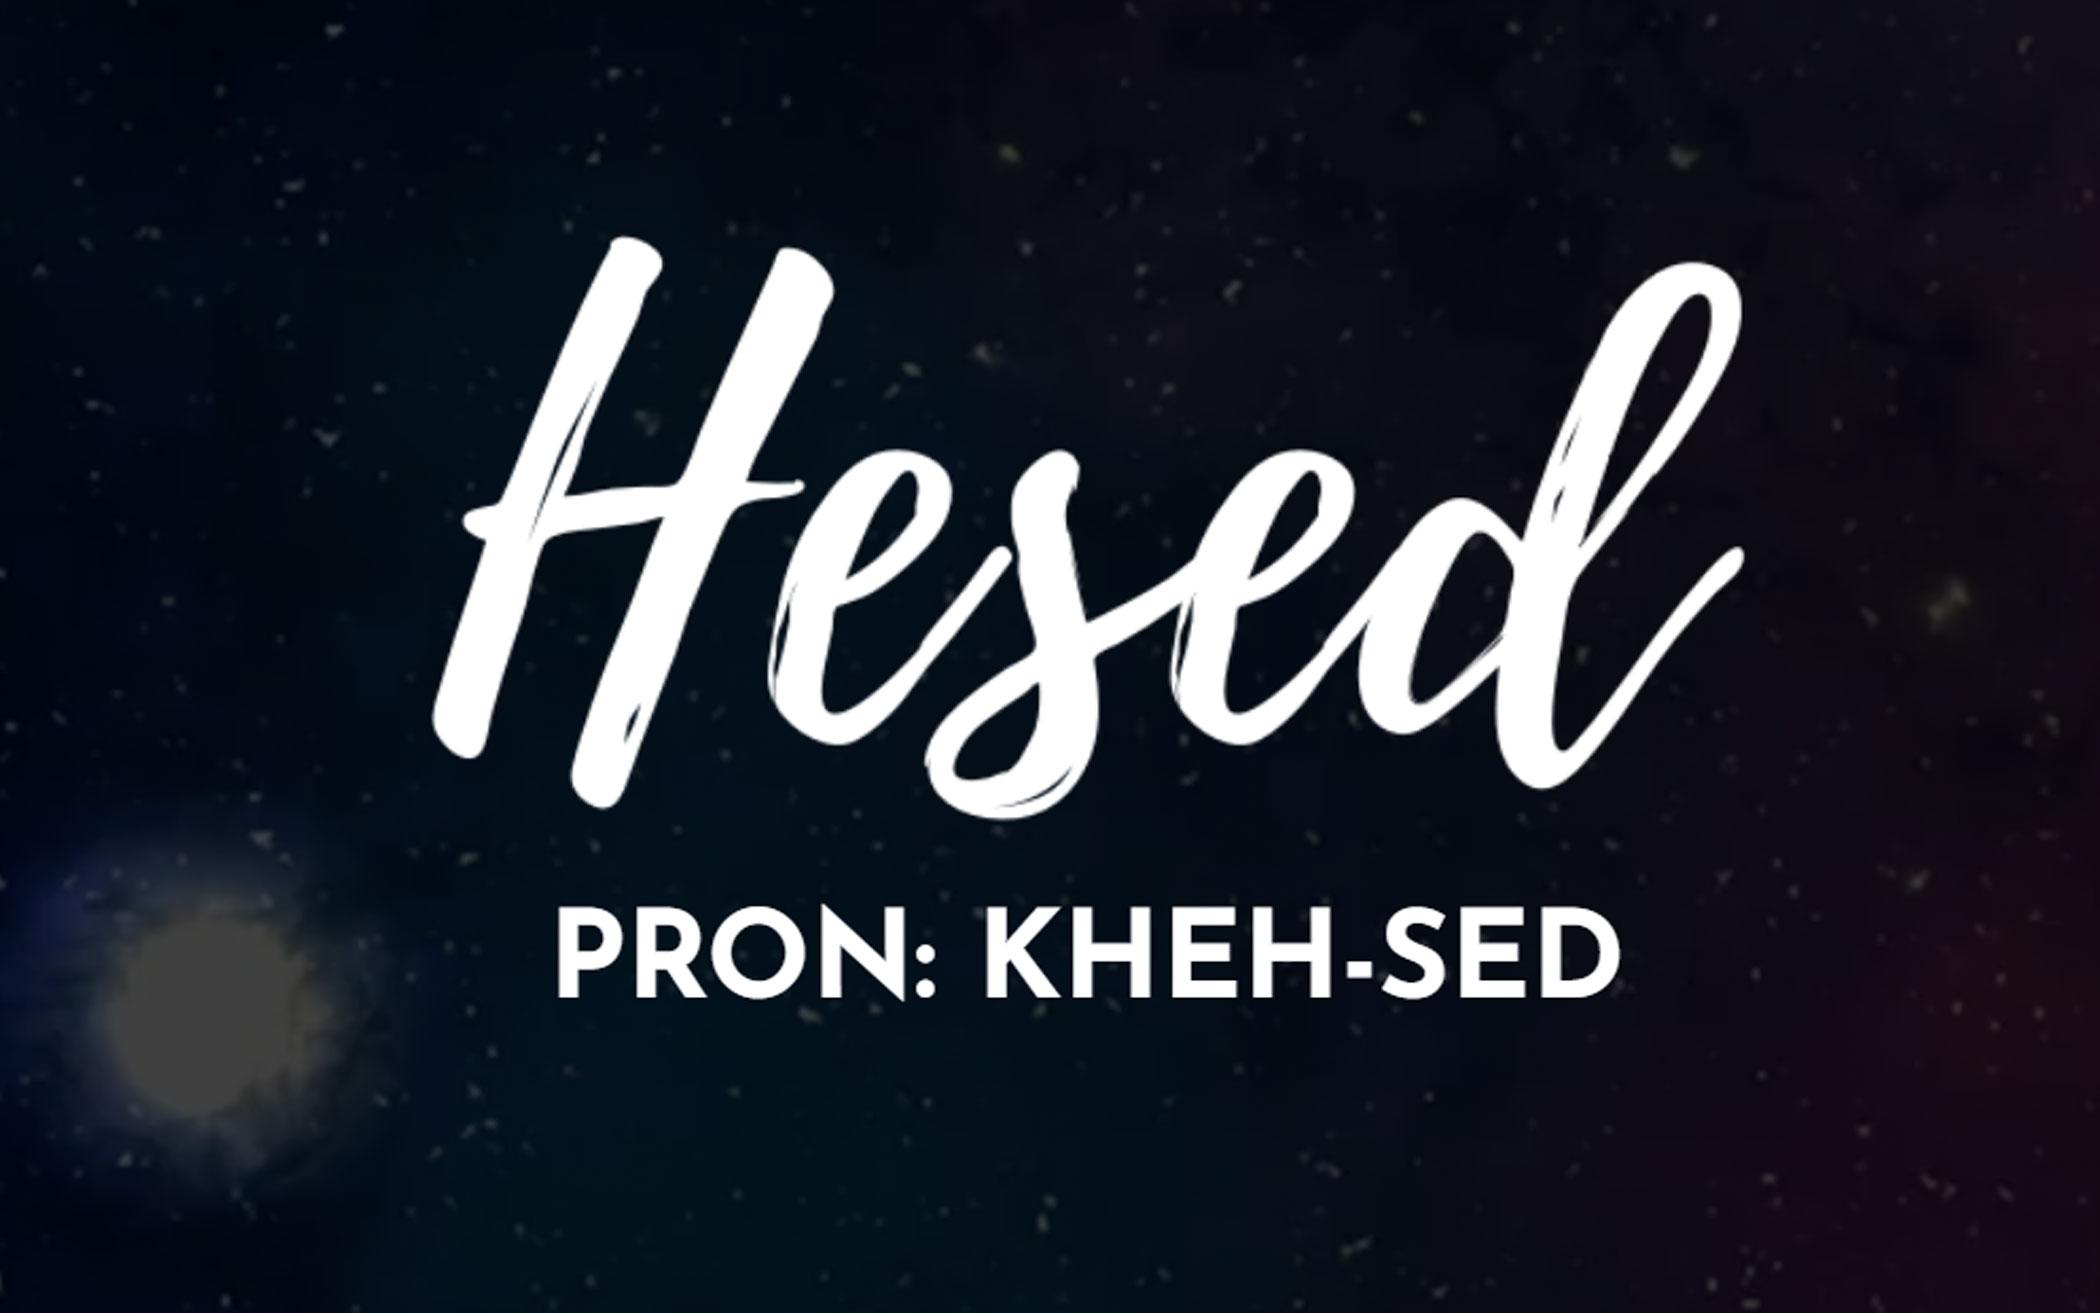 The Hesed Project: A Response to the Human Sexuality Report